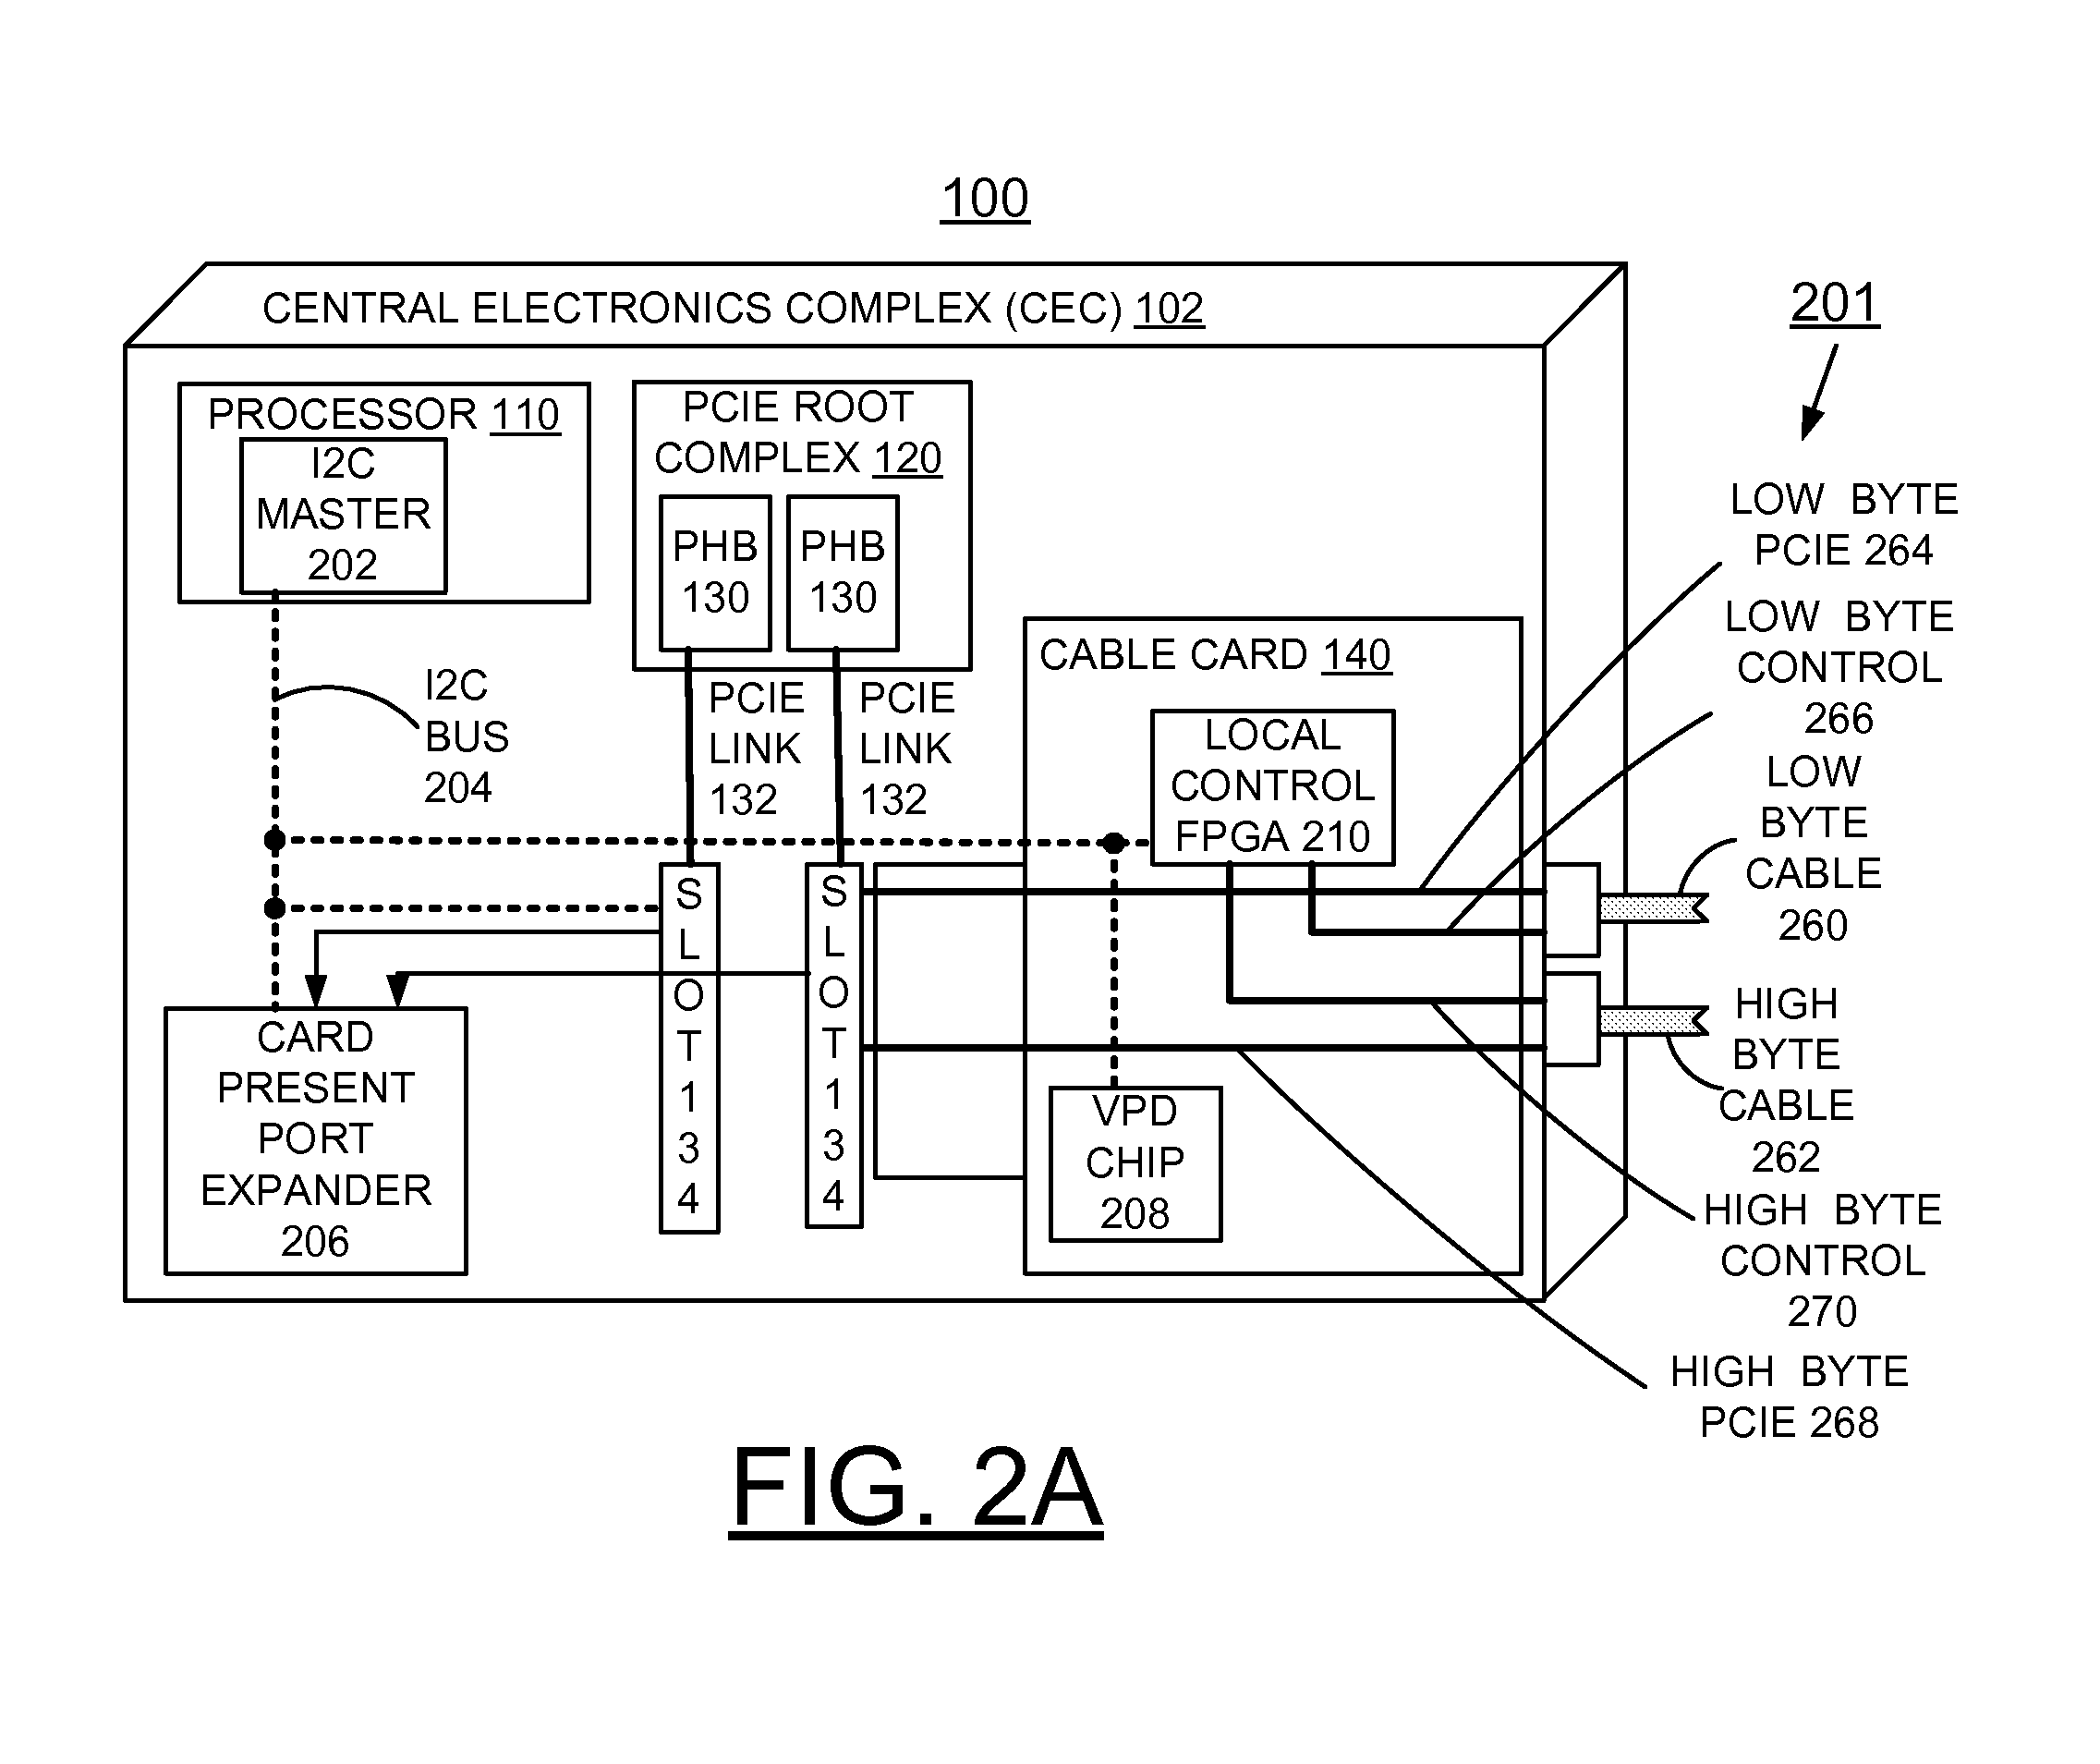 Implementing health check for optical cable attached PCIE enclosure